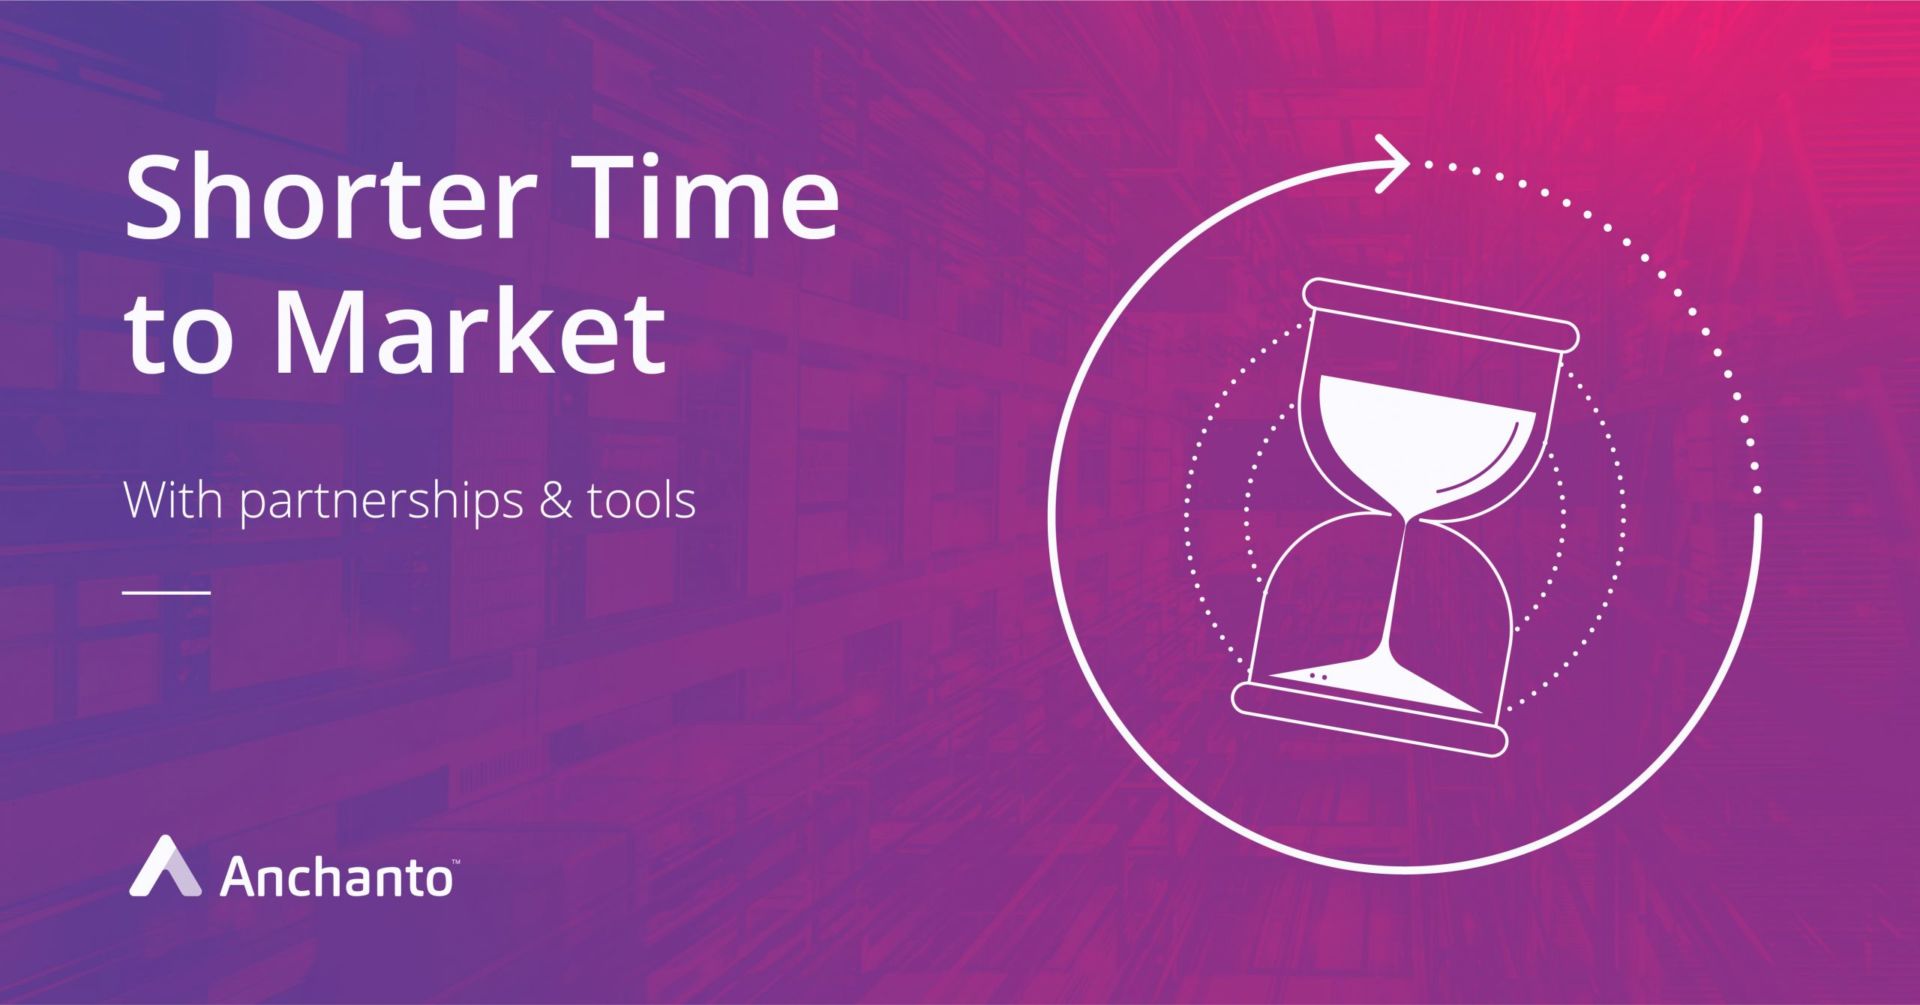 How to Use Partnerships and Tools for Shorter Time-to-market?